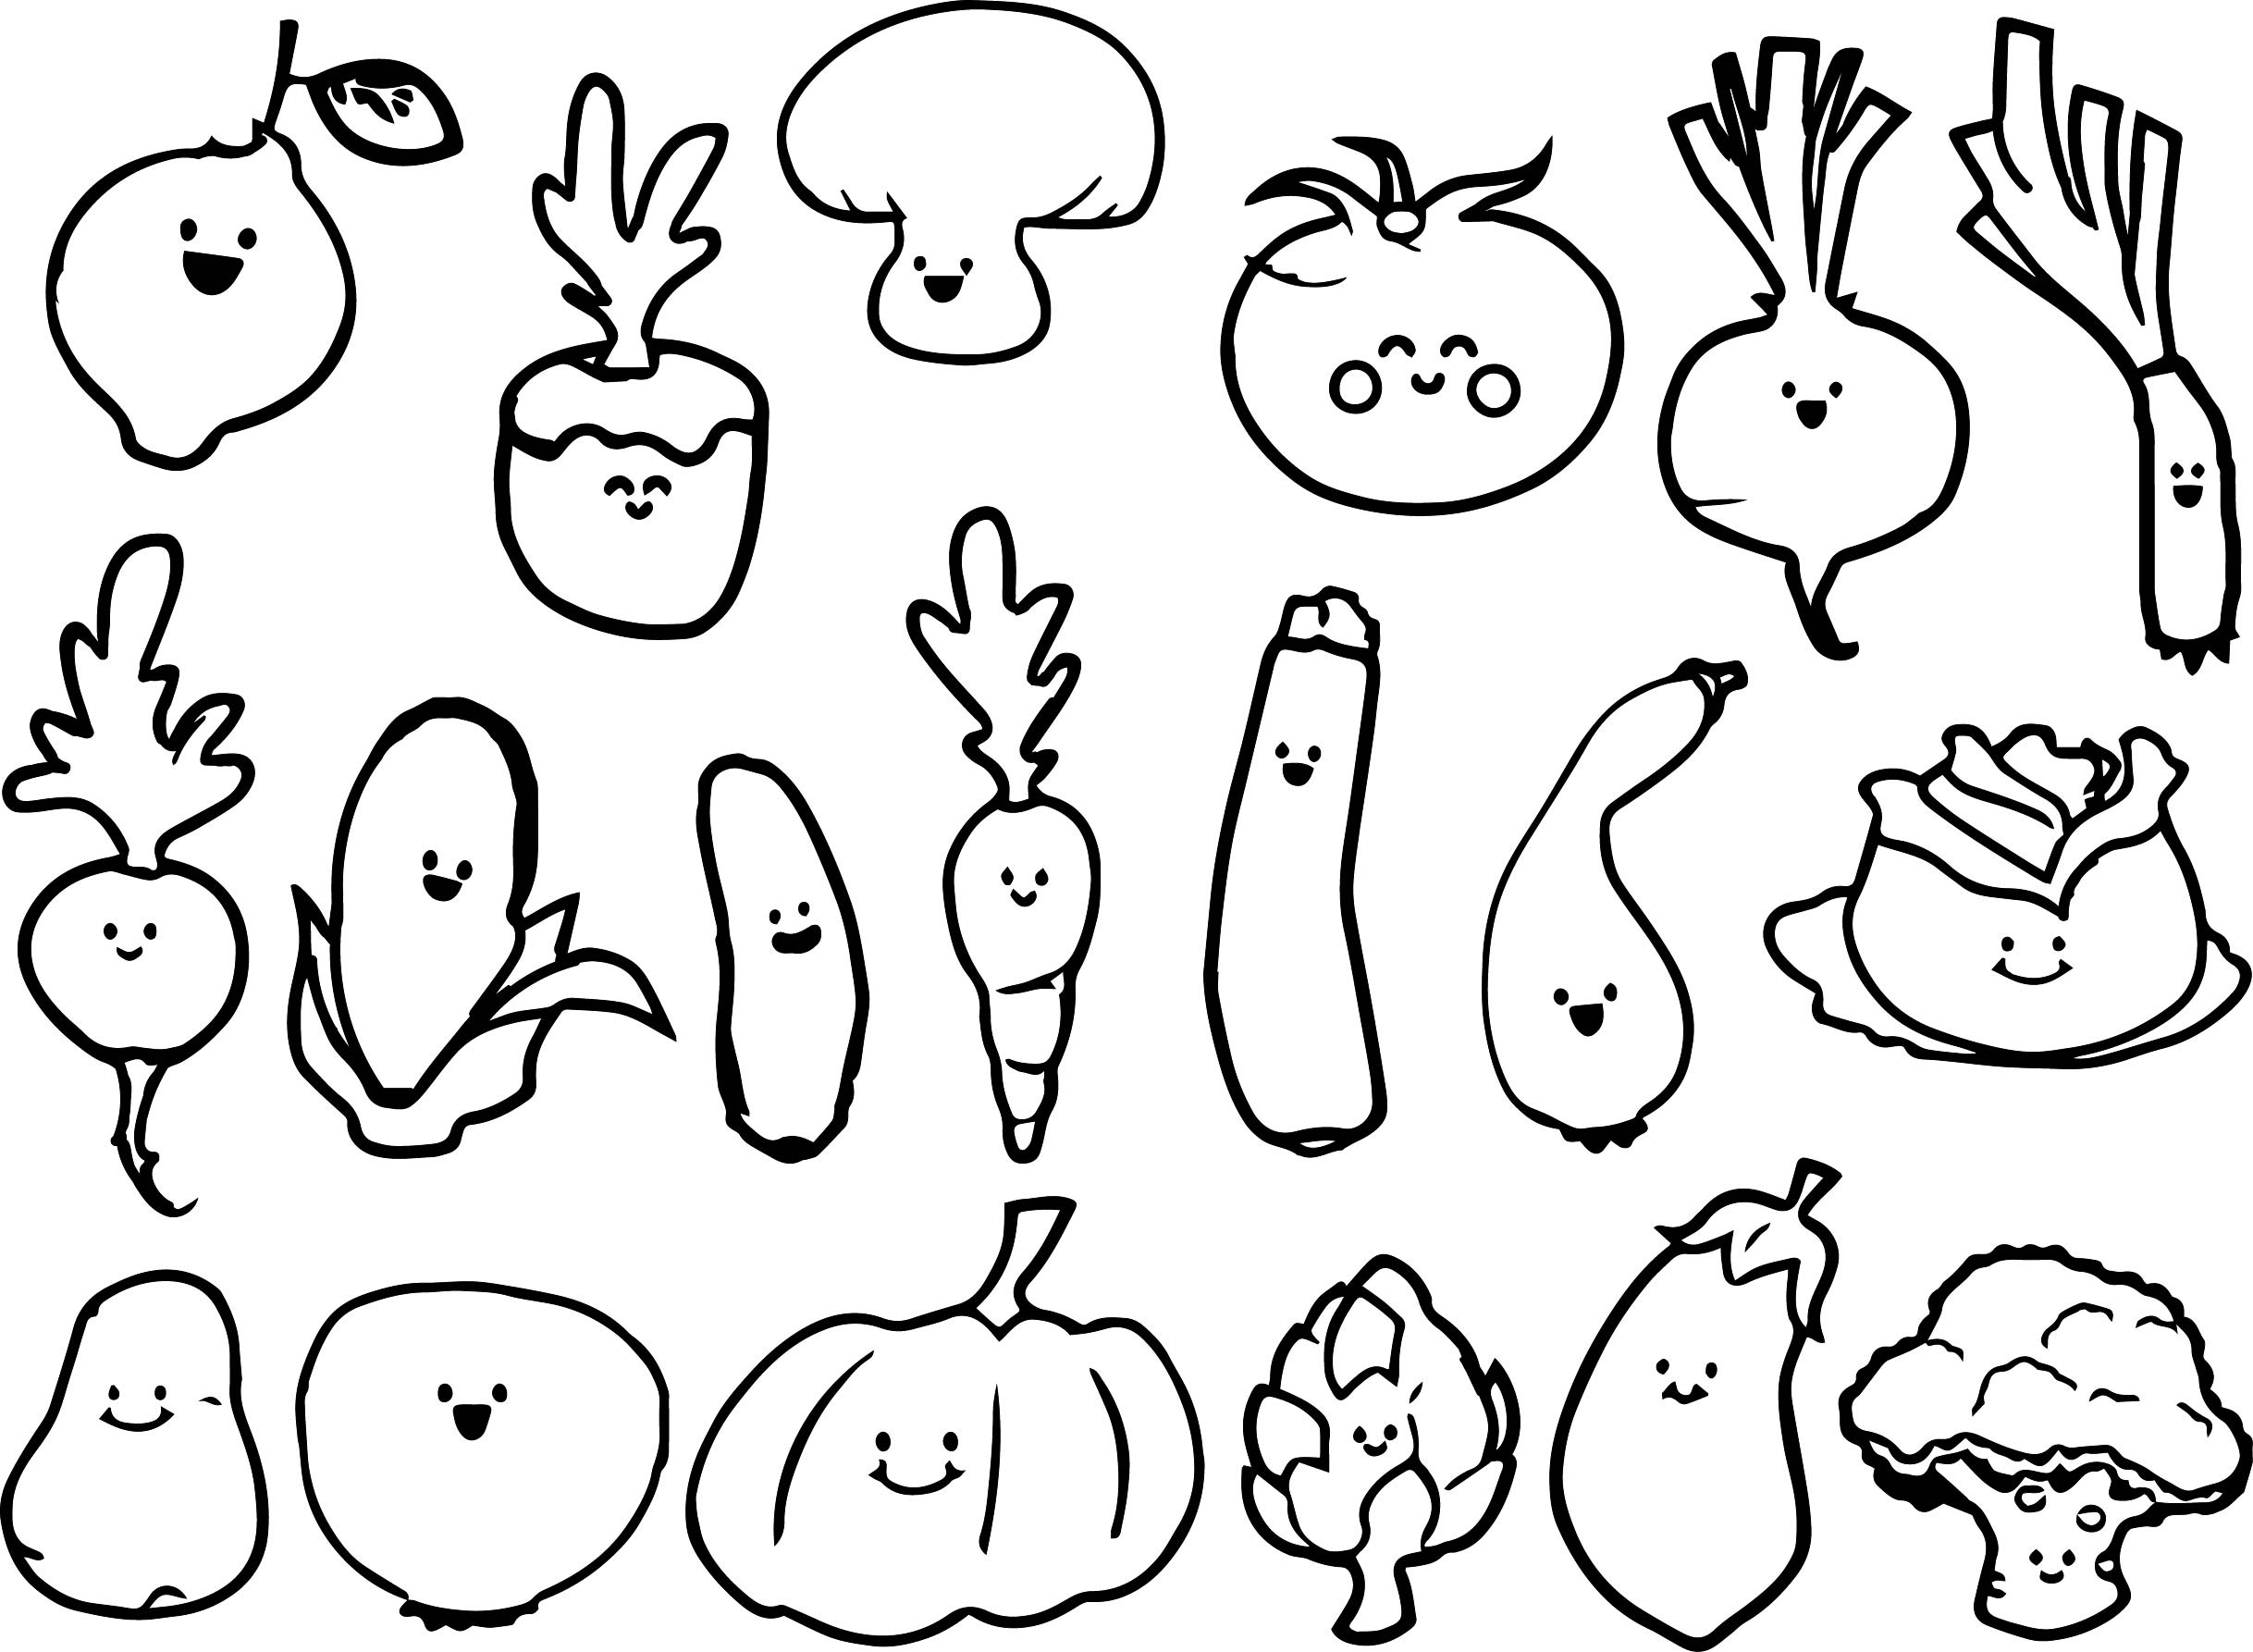 Download Vegetable Coloring Pages - Best Coloring Pages For Kids